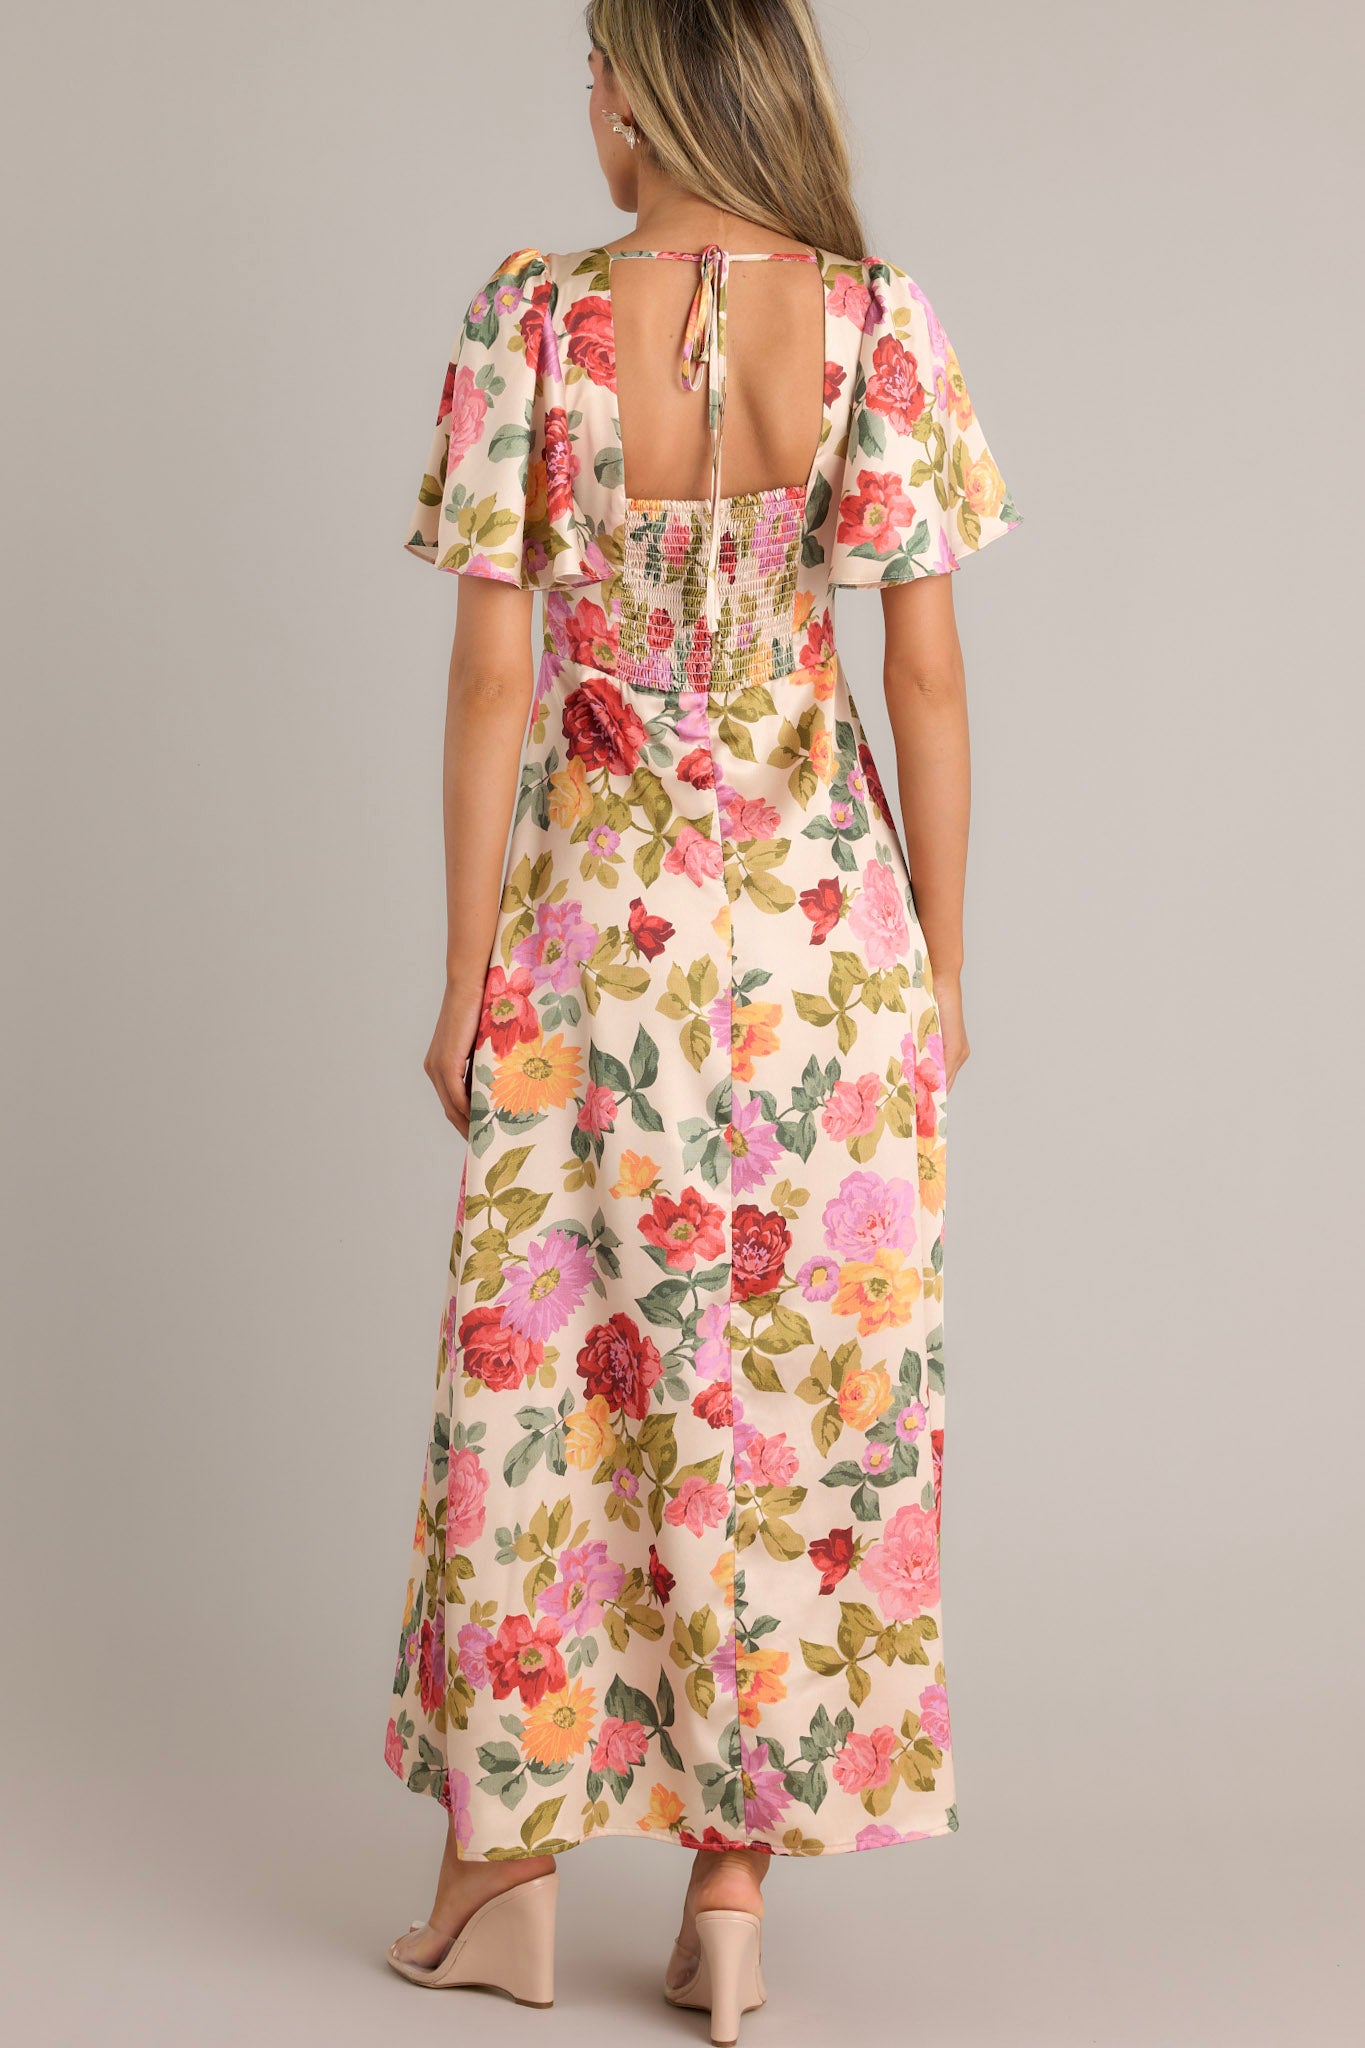 Back view of this beige floral maxi dress featuring a deep V-neckline, flutter sleeves, fitted waist, and A-line skirt with a warm floral print.